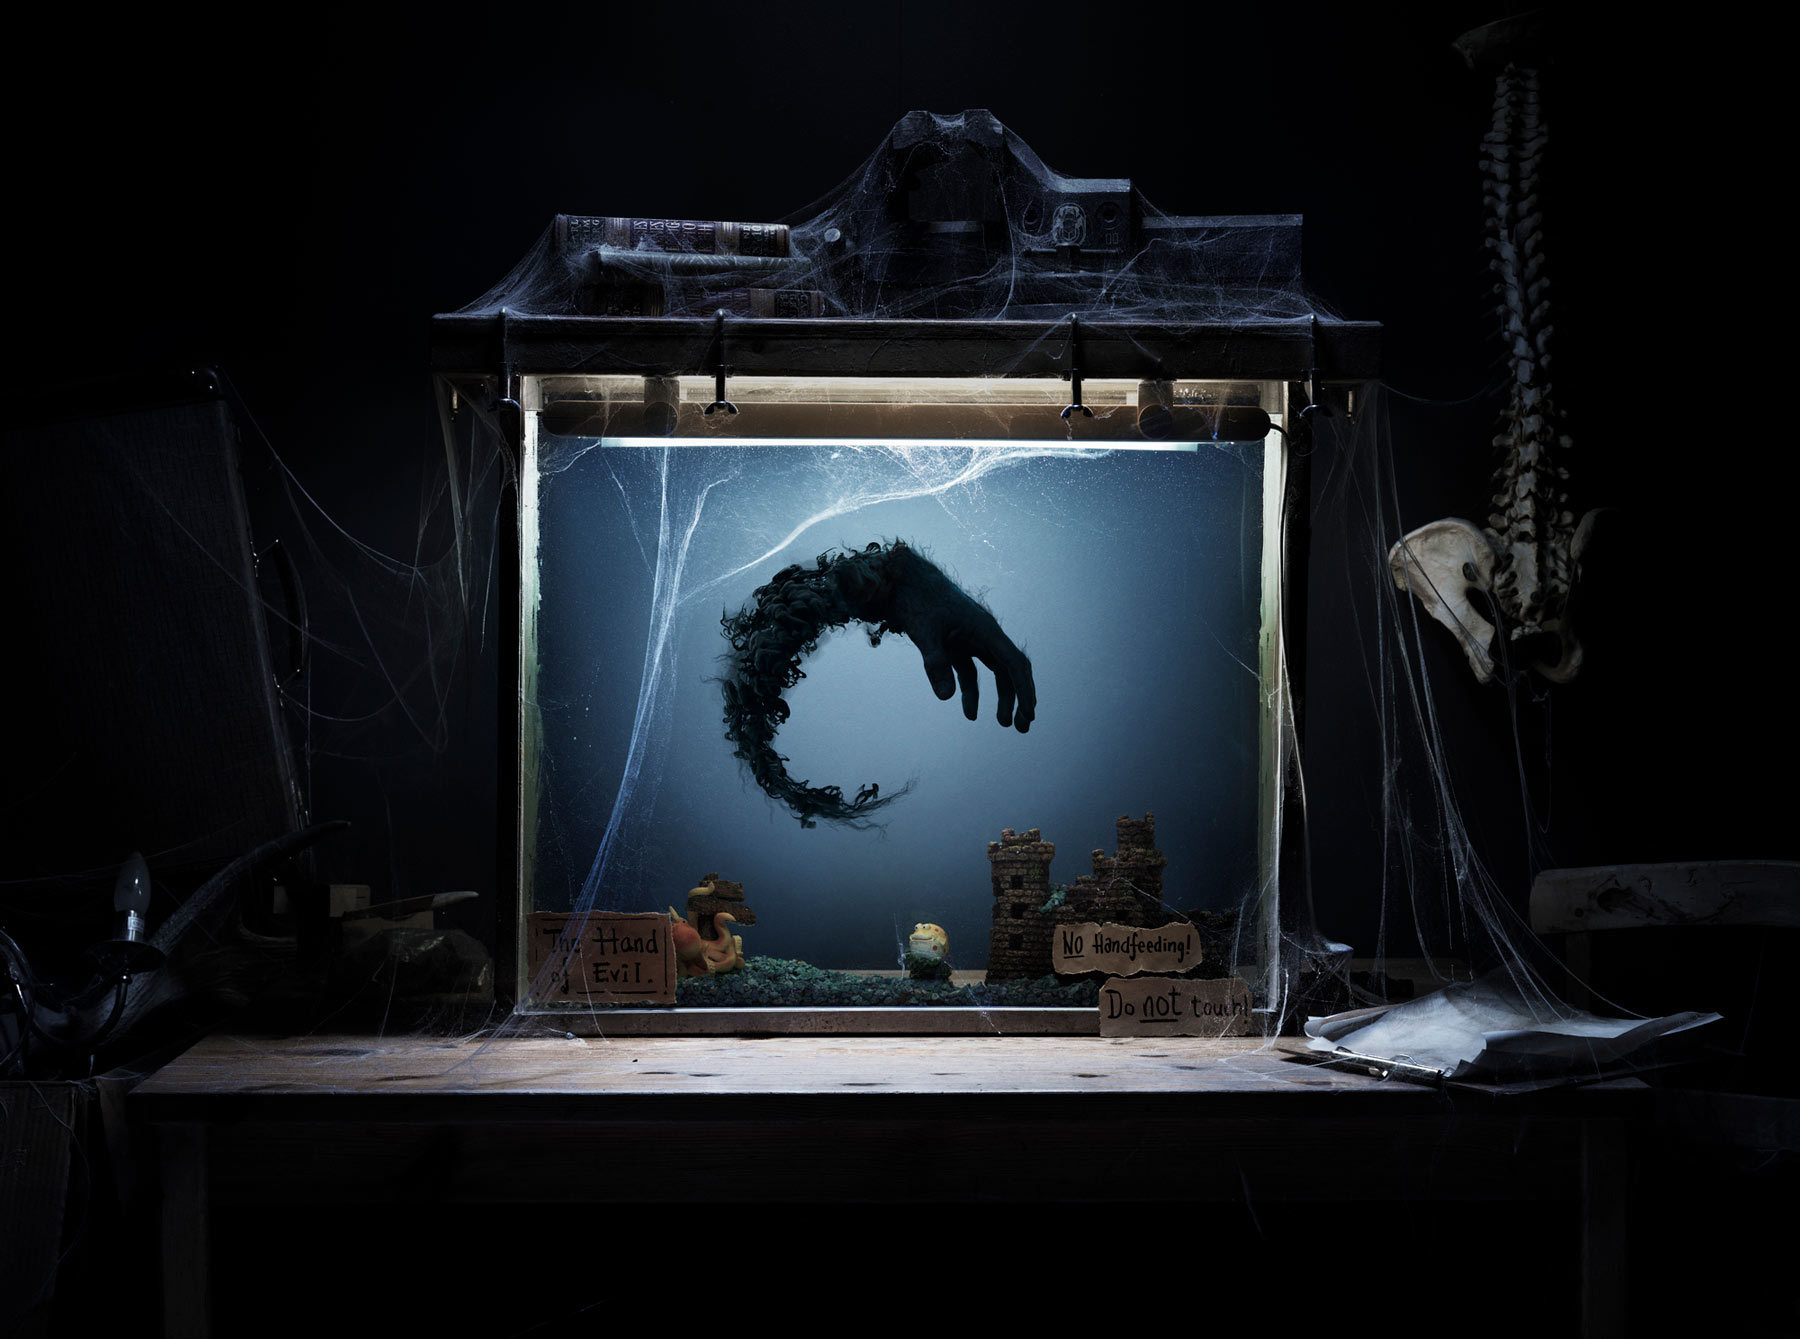 The hand of evil, circling in his aquarium prison. By Håvard Schei